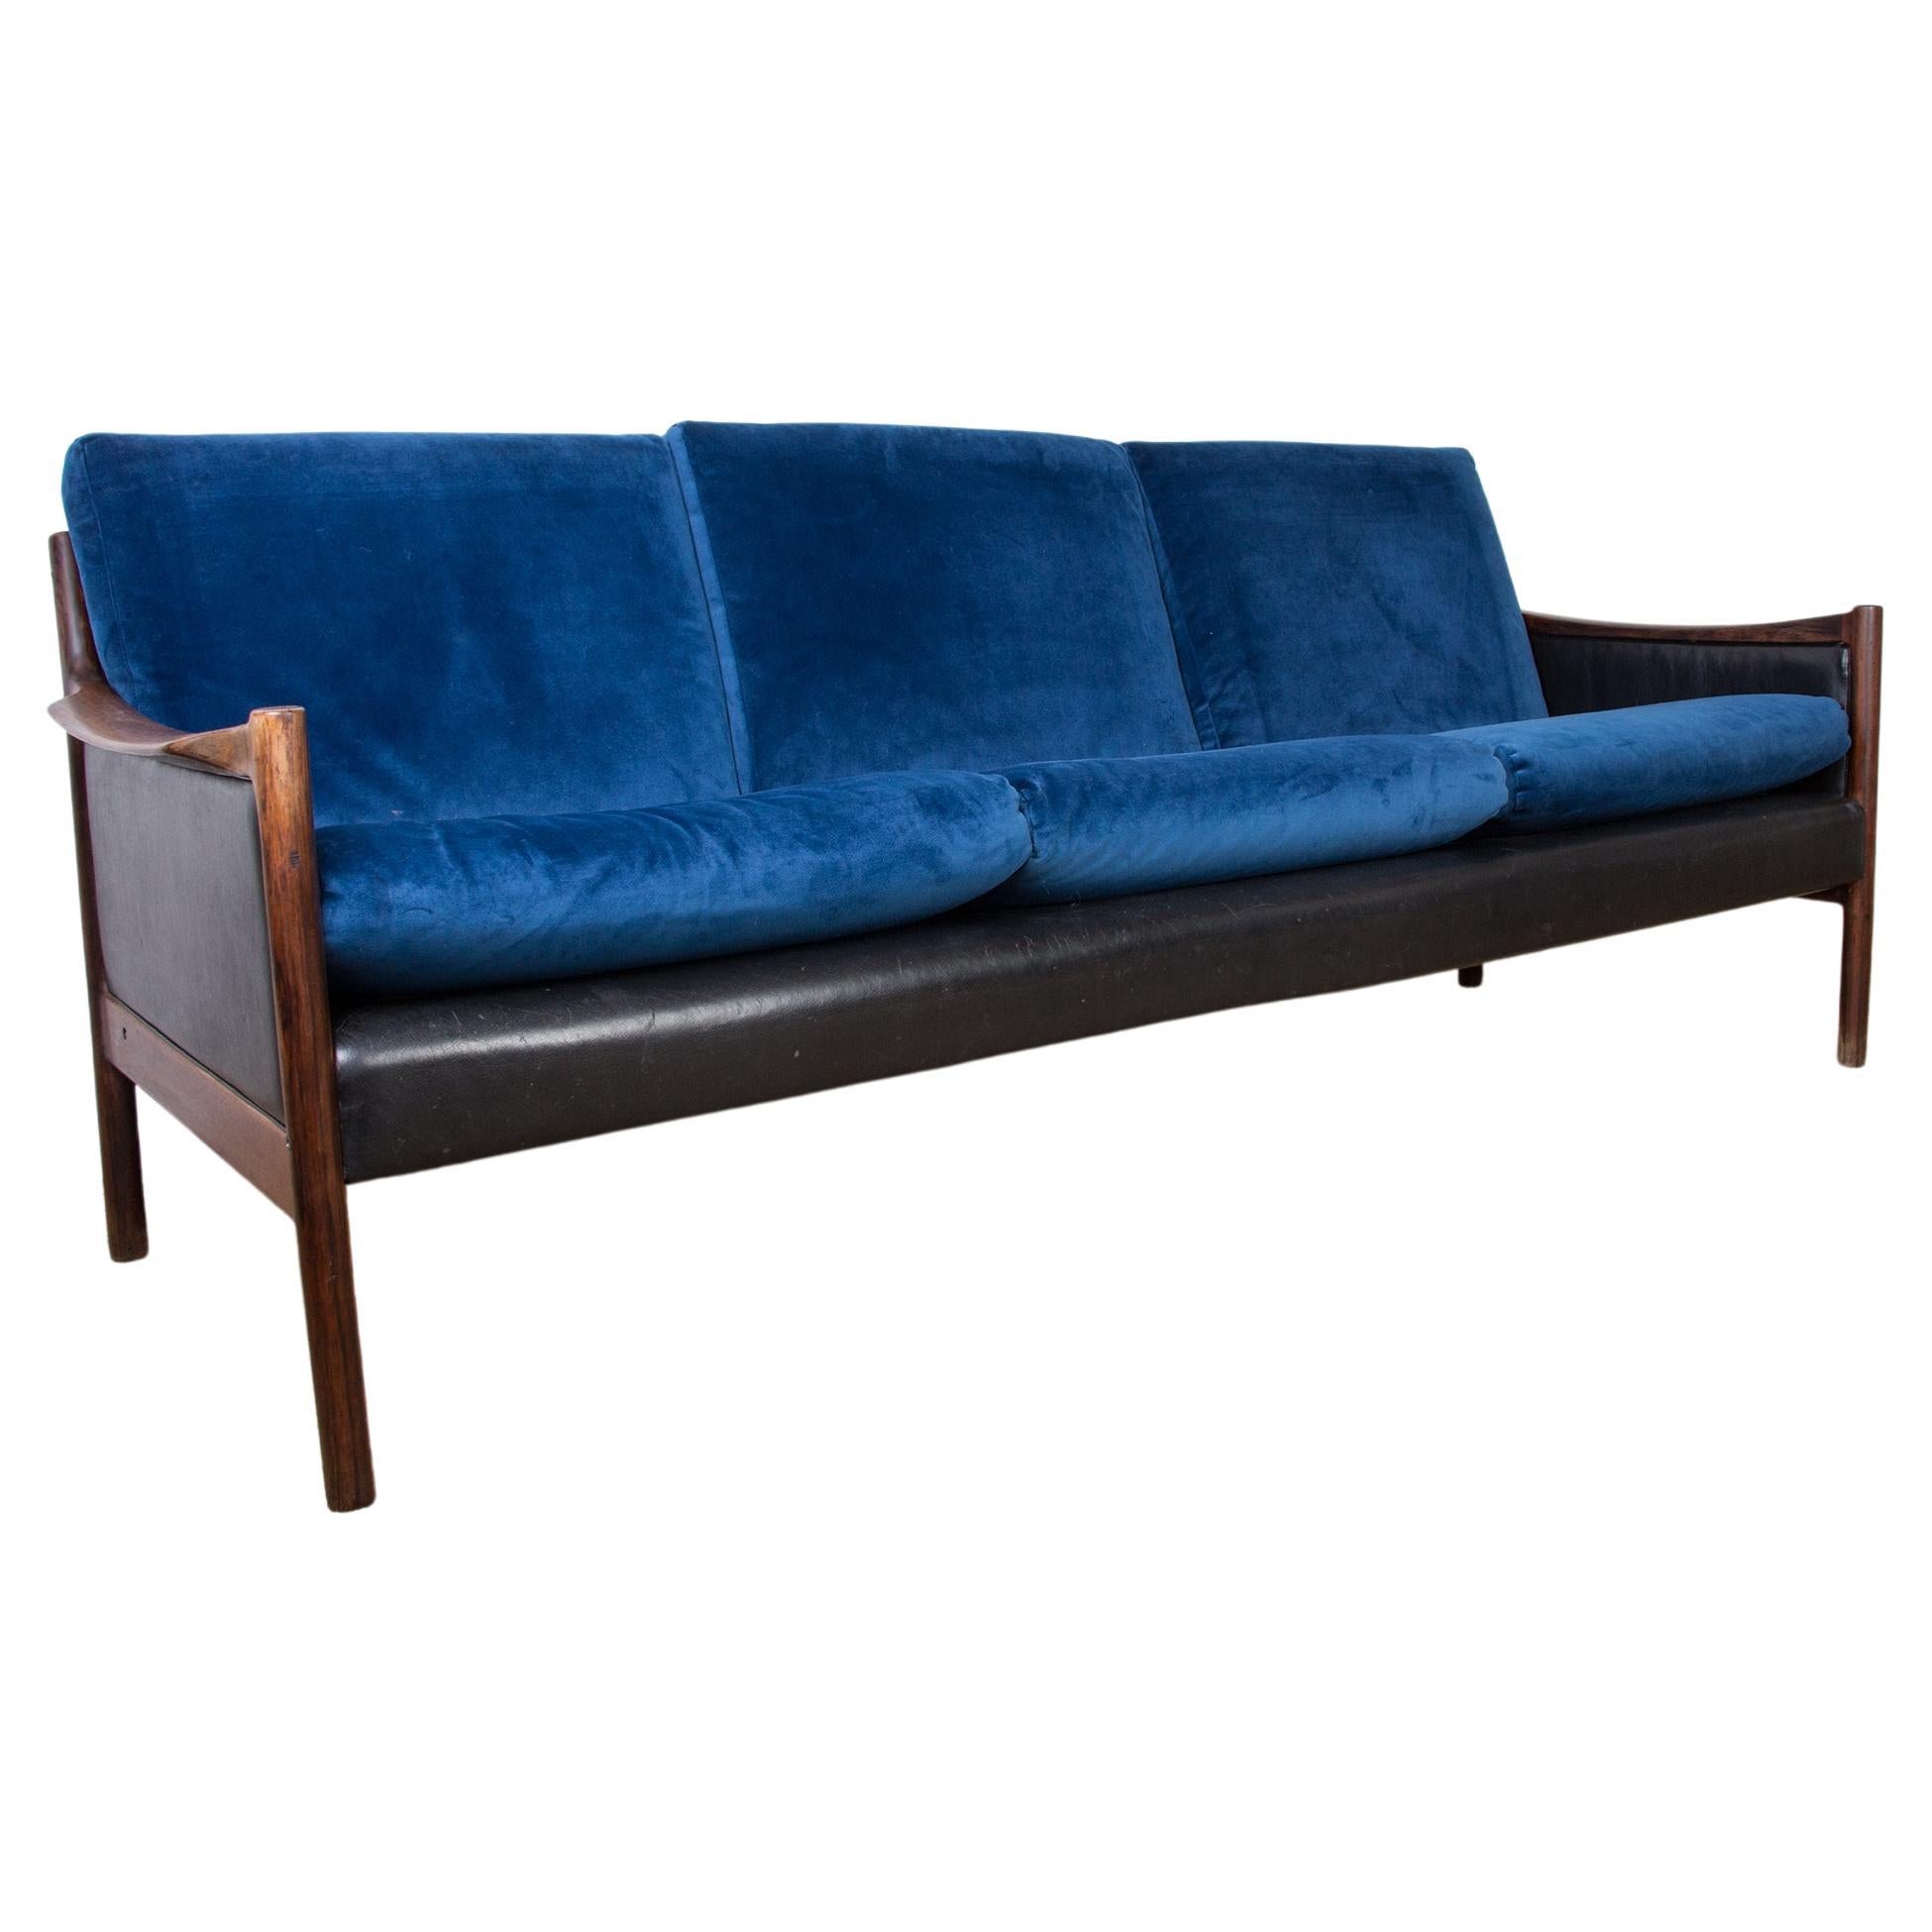 Danish Sofa in Rosewood, Leather and Fabric by Torbjorn Afdal for Bruksbo 1960